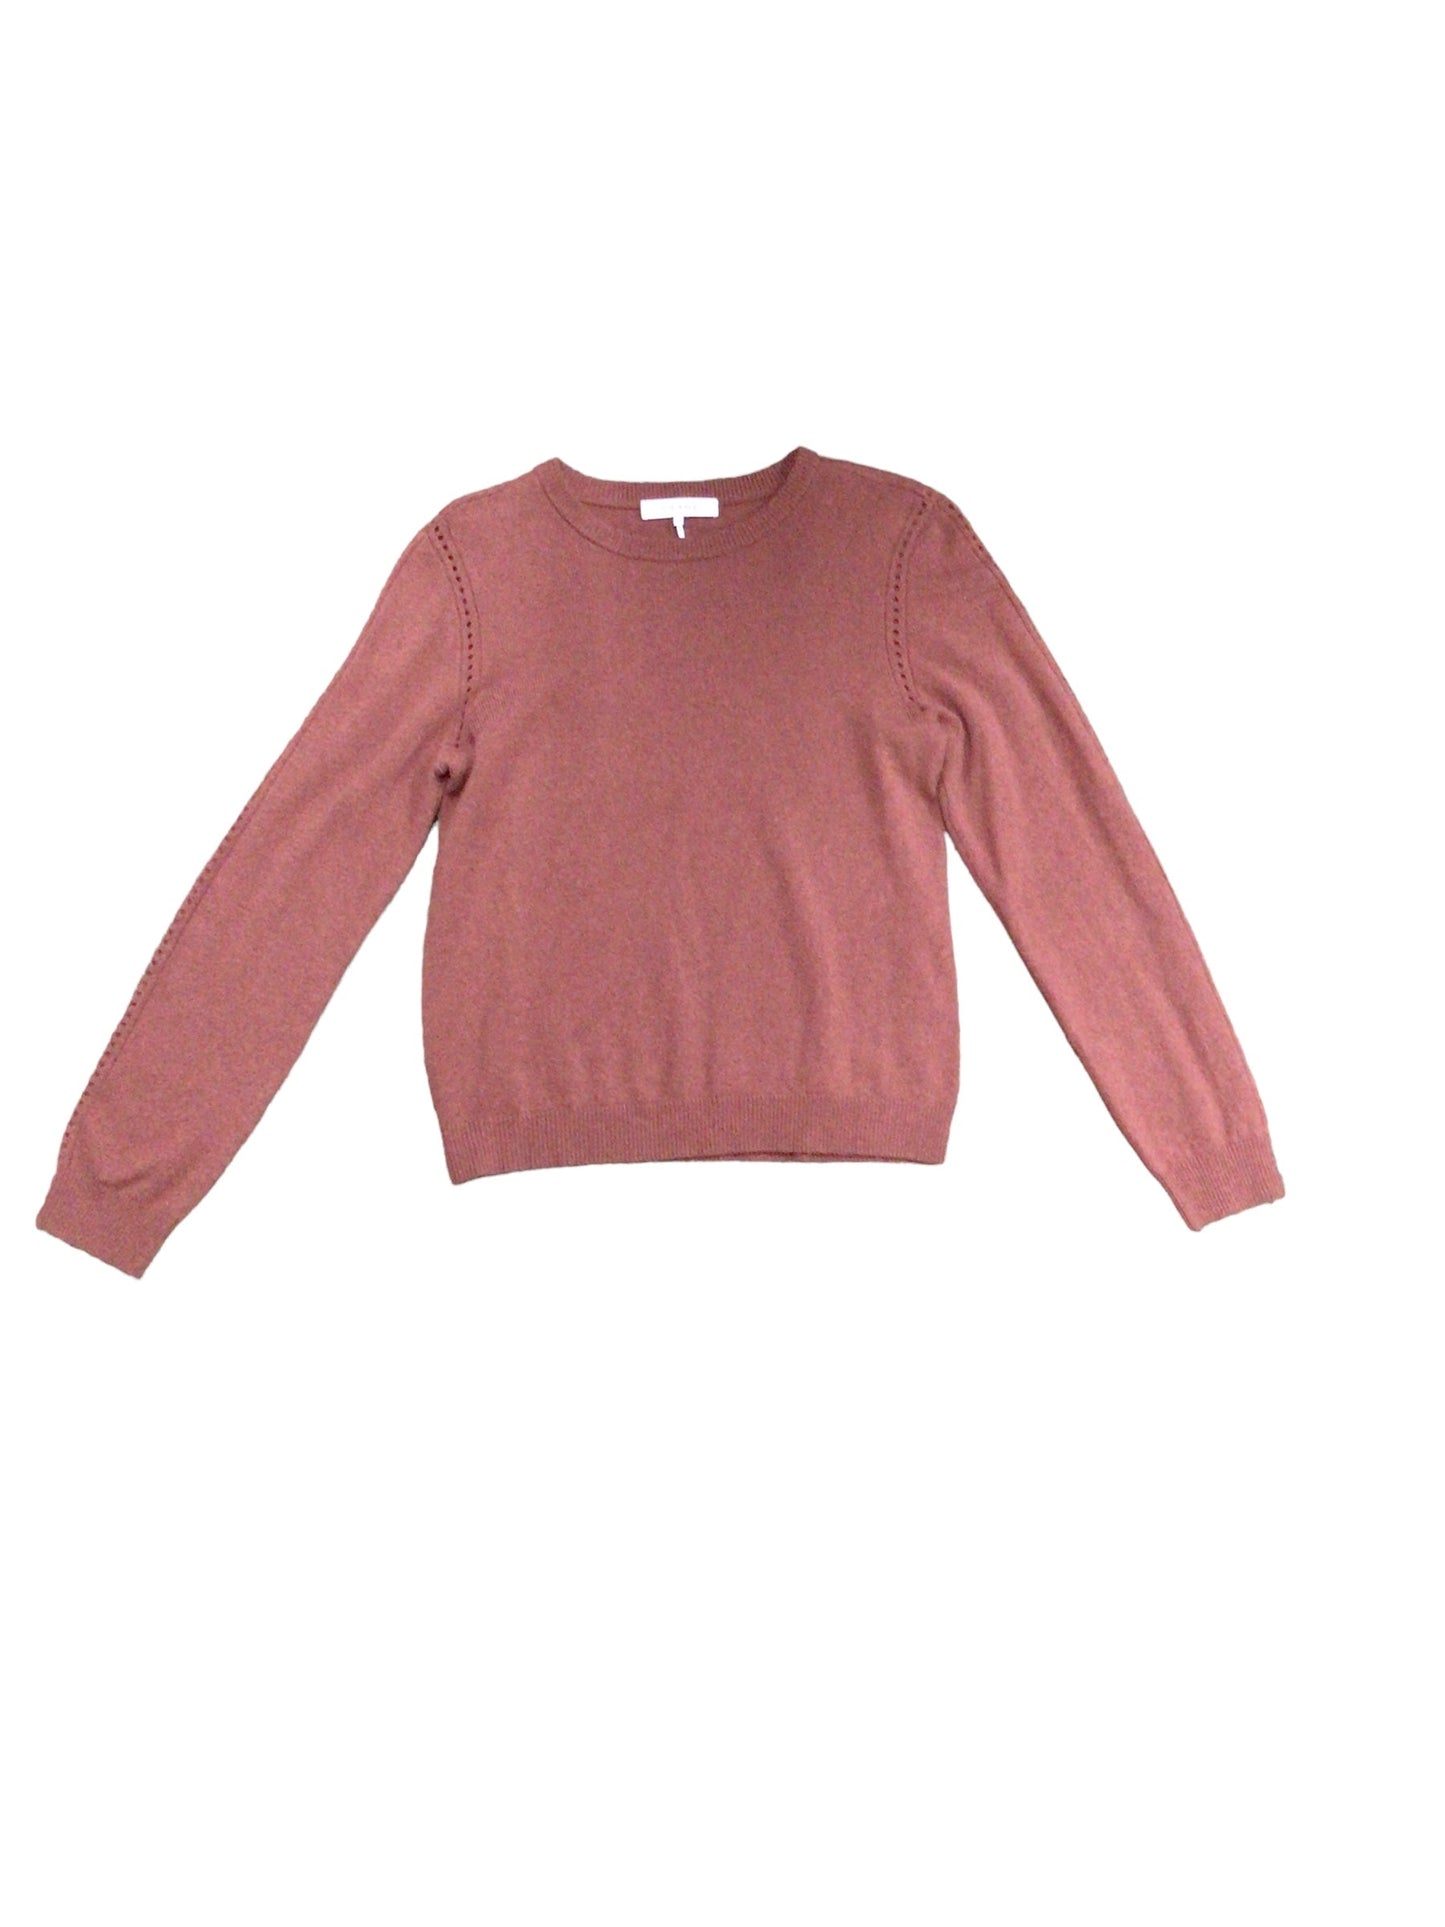 Sweater By Frame  Size: L